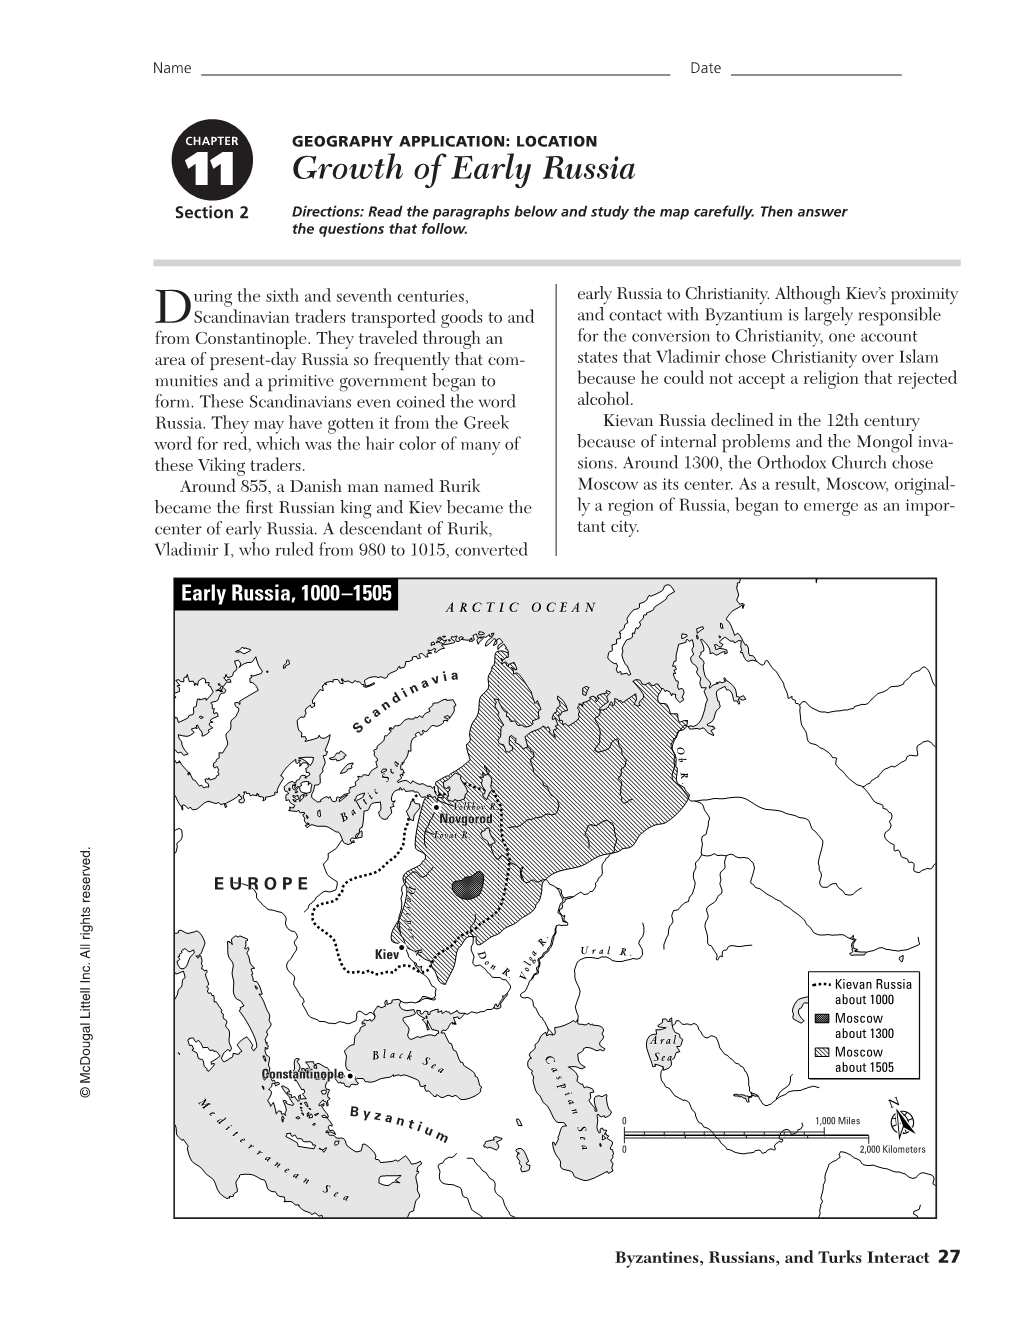 Growth of Early Russia Section 2 Directions: Read the Paragraphs Below and Study the Map Carefully